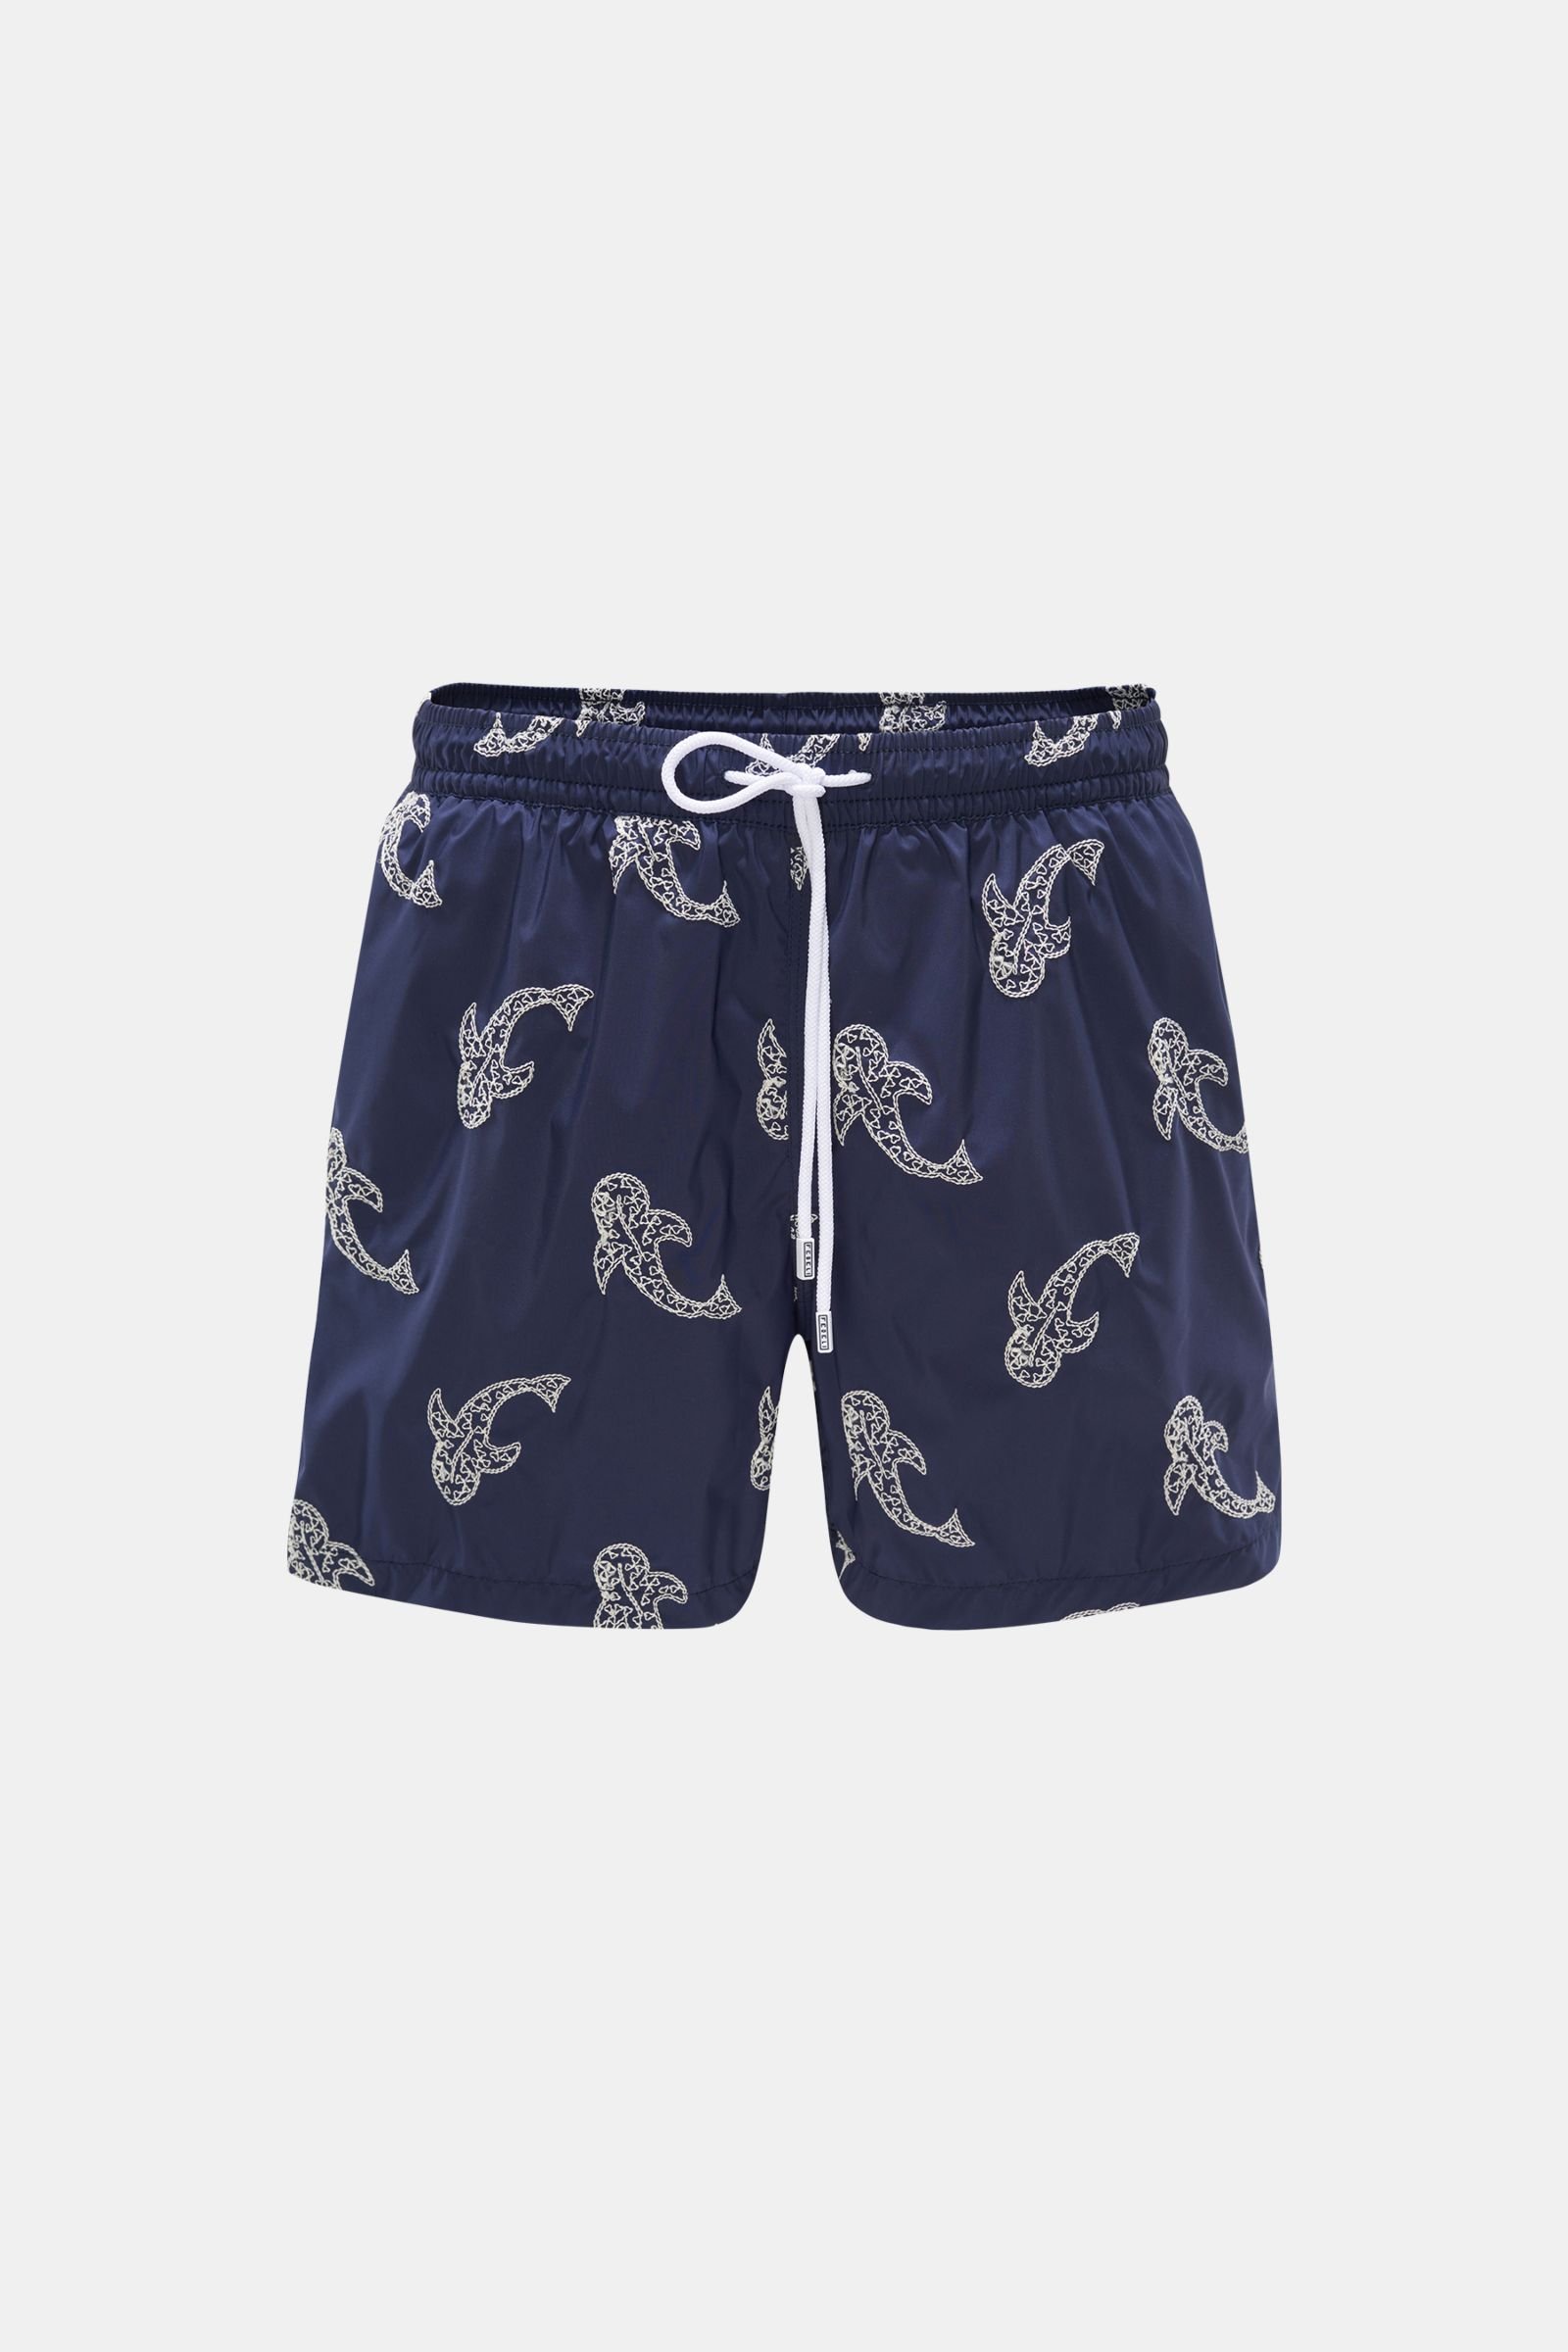 Swim shorts 'Madeira Airstop' navy/white patterned